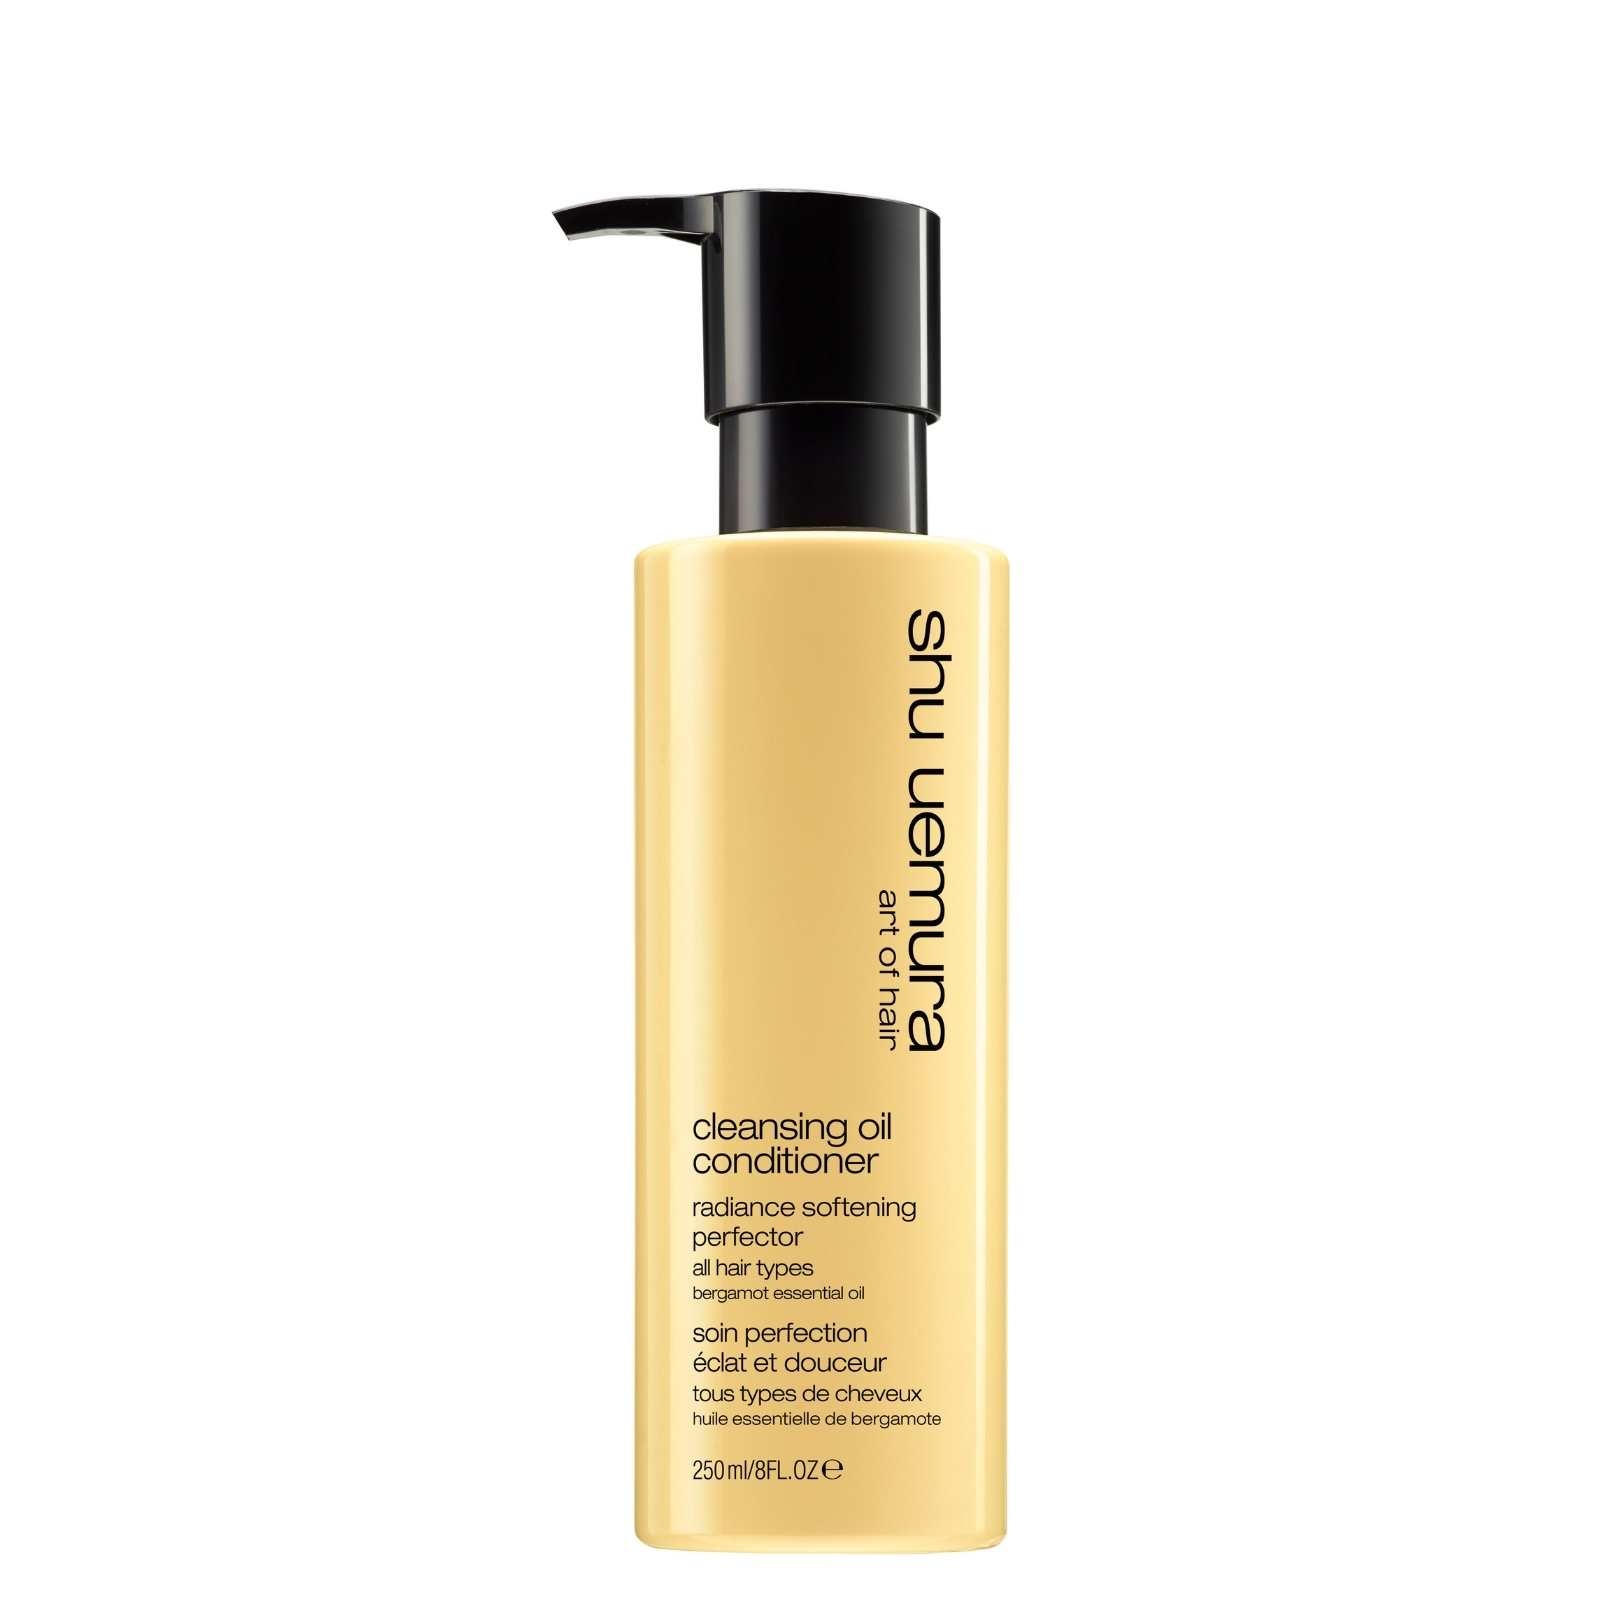 CLEANSING OIL Radiance Softening Perfector 250ml (8 oz)